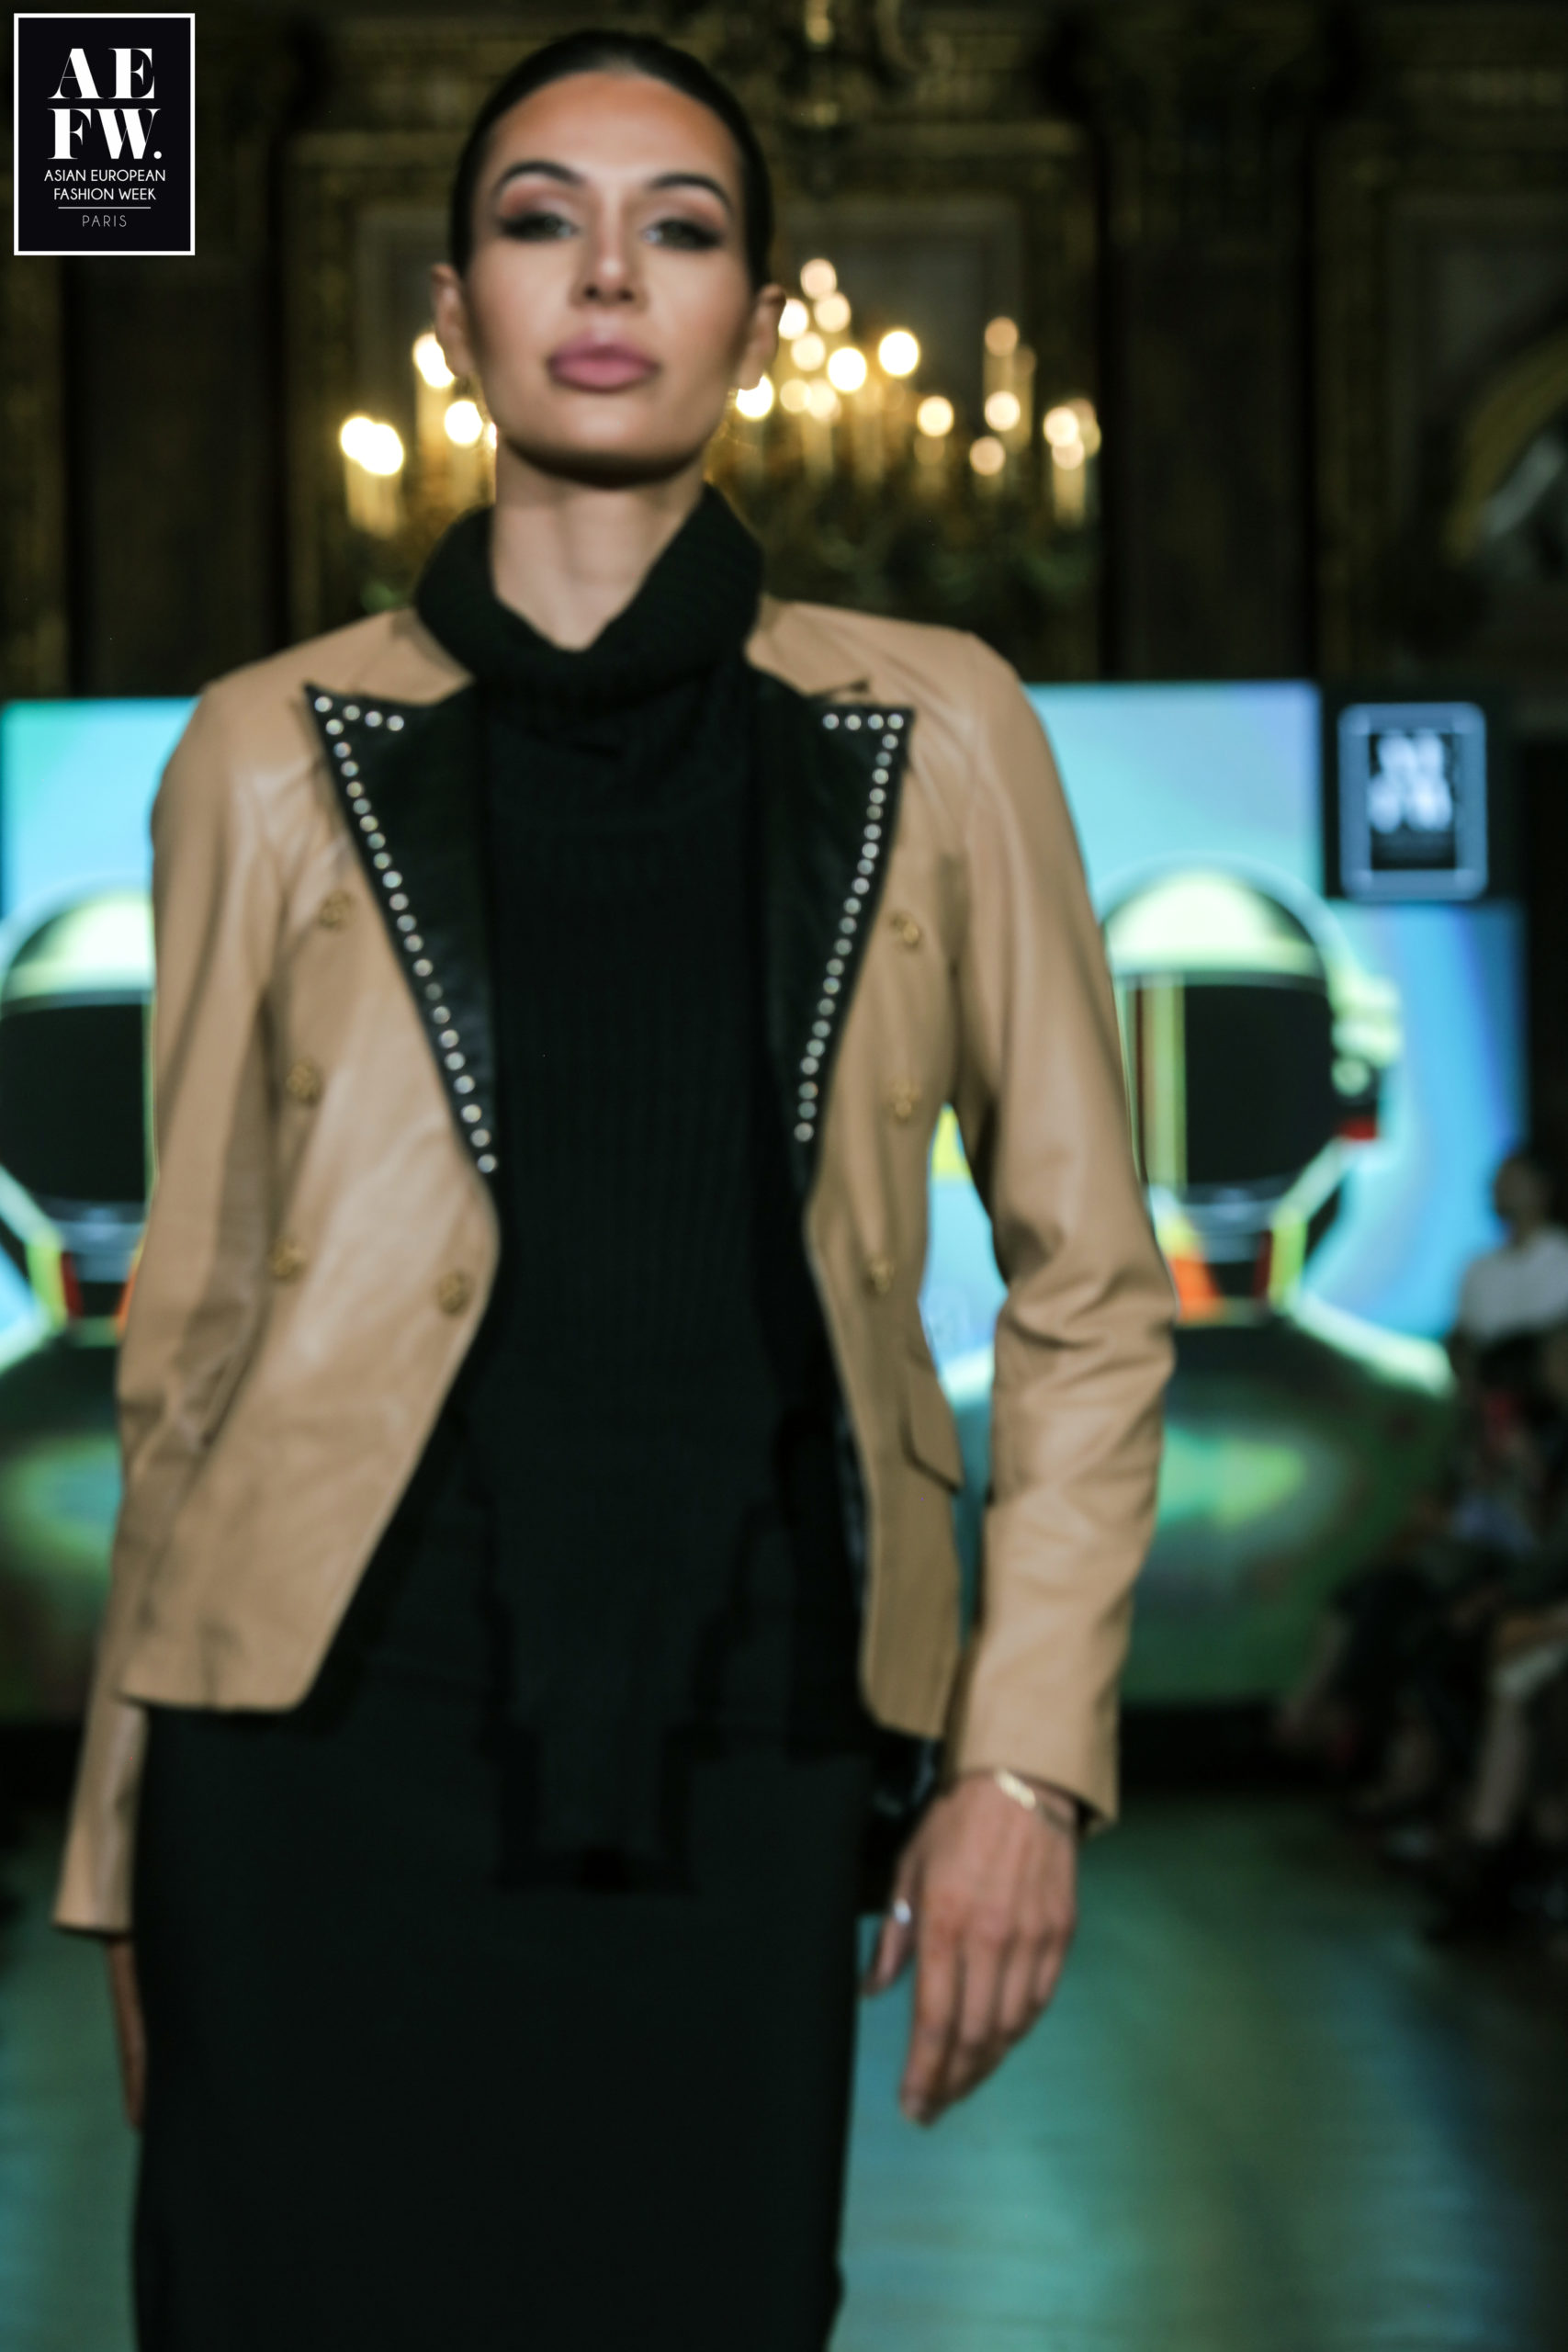 AEFW (Asian European Fashion Week - MICHAEL LOMBARD - ML SOLO PARIS - The King of Leather - PFW SS24  -WEST IN PARIS-VENDOME